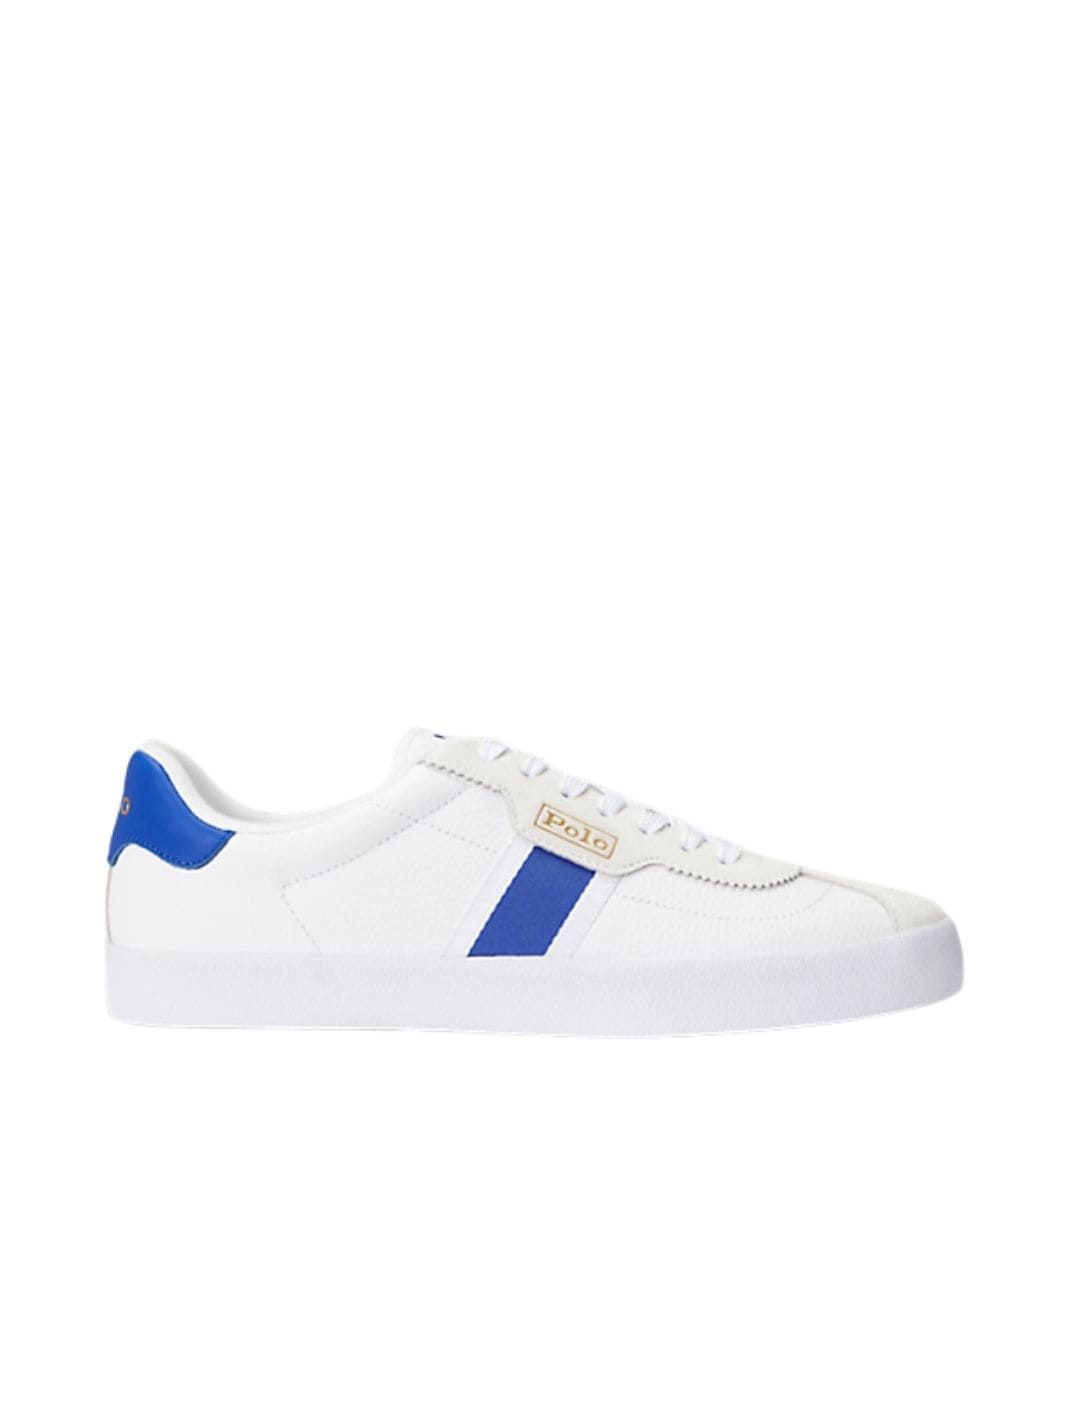 Polo Ralph Lauren Shoes Sneakers | Tumbled Court White/Blue